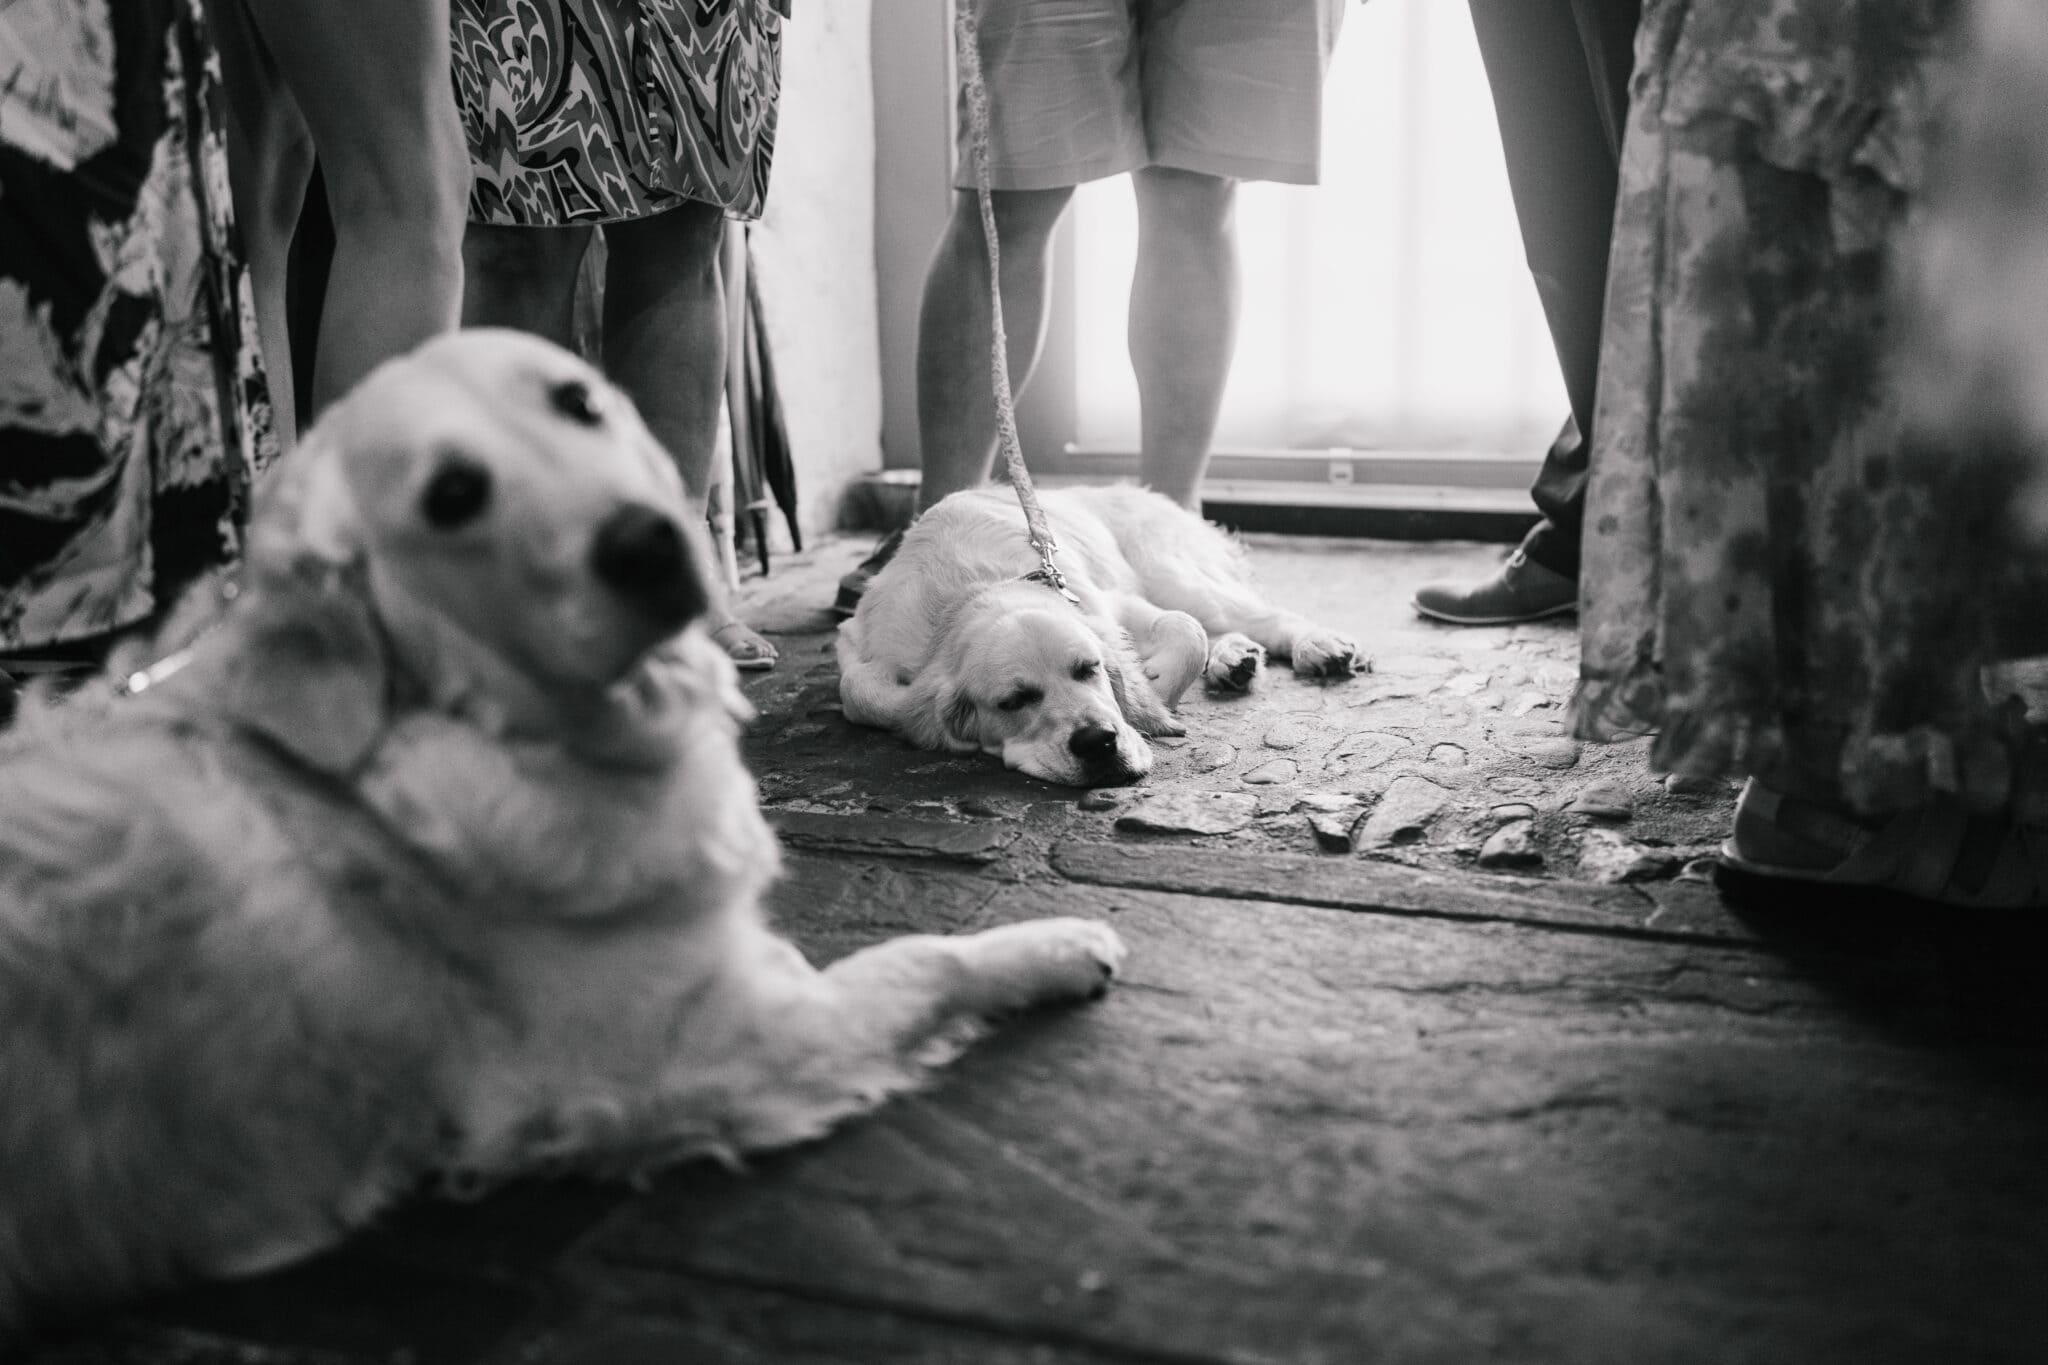 Two golden retrievers lying on a textured floor in a room with people standing, visible only from the waist down. the atmosphere is casual and the photo is in black and white.